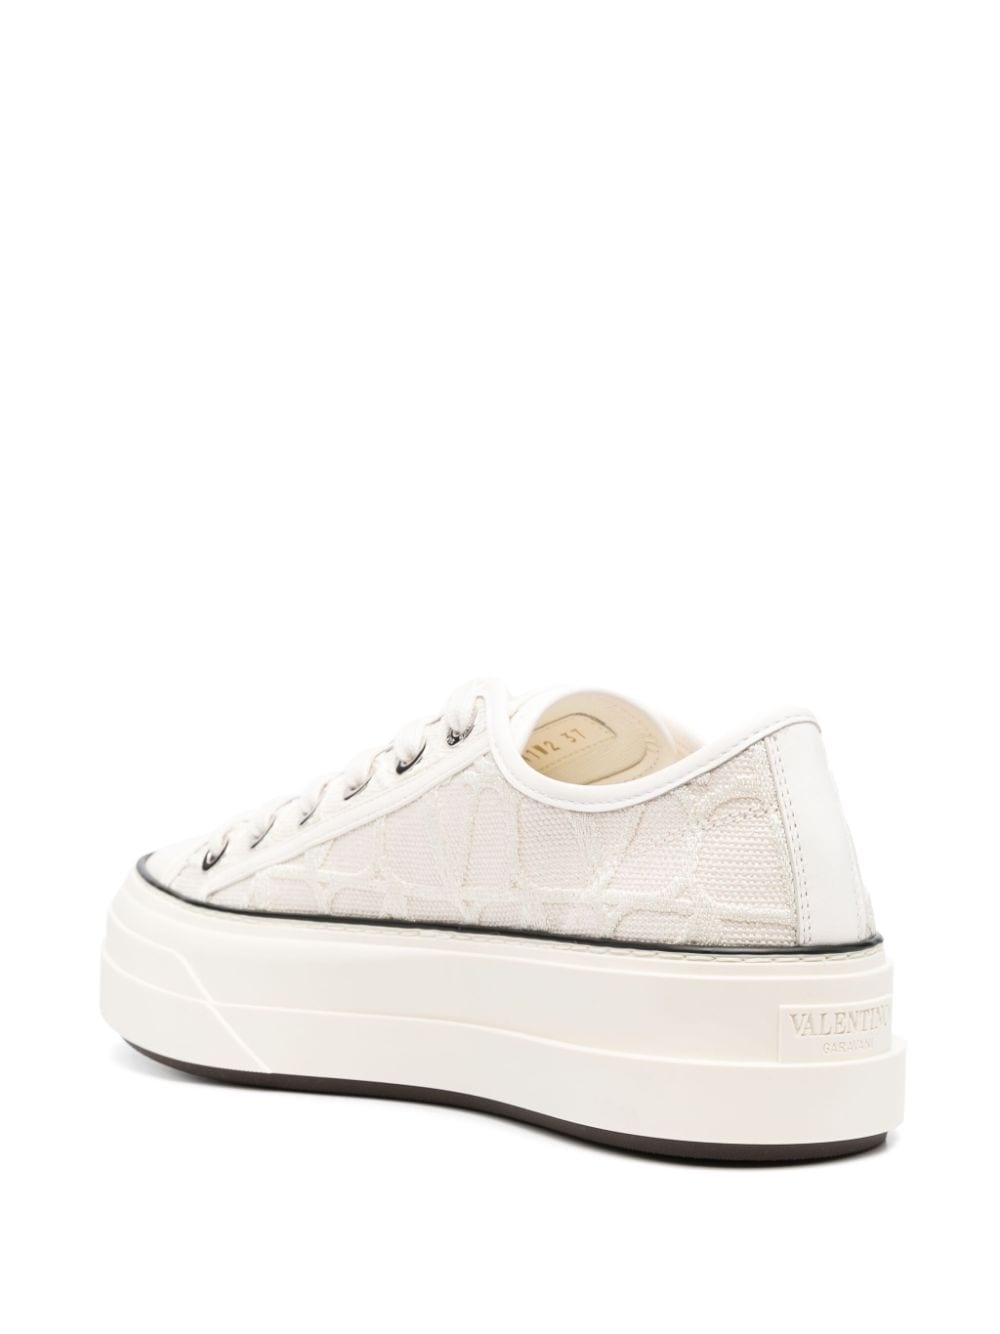 platform-sole lace-up sneakers - 3